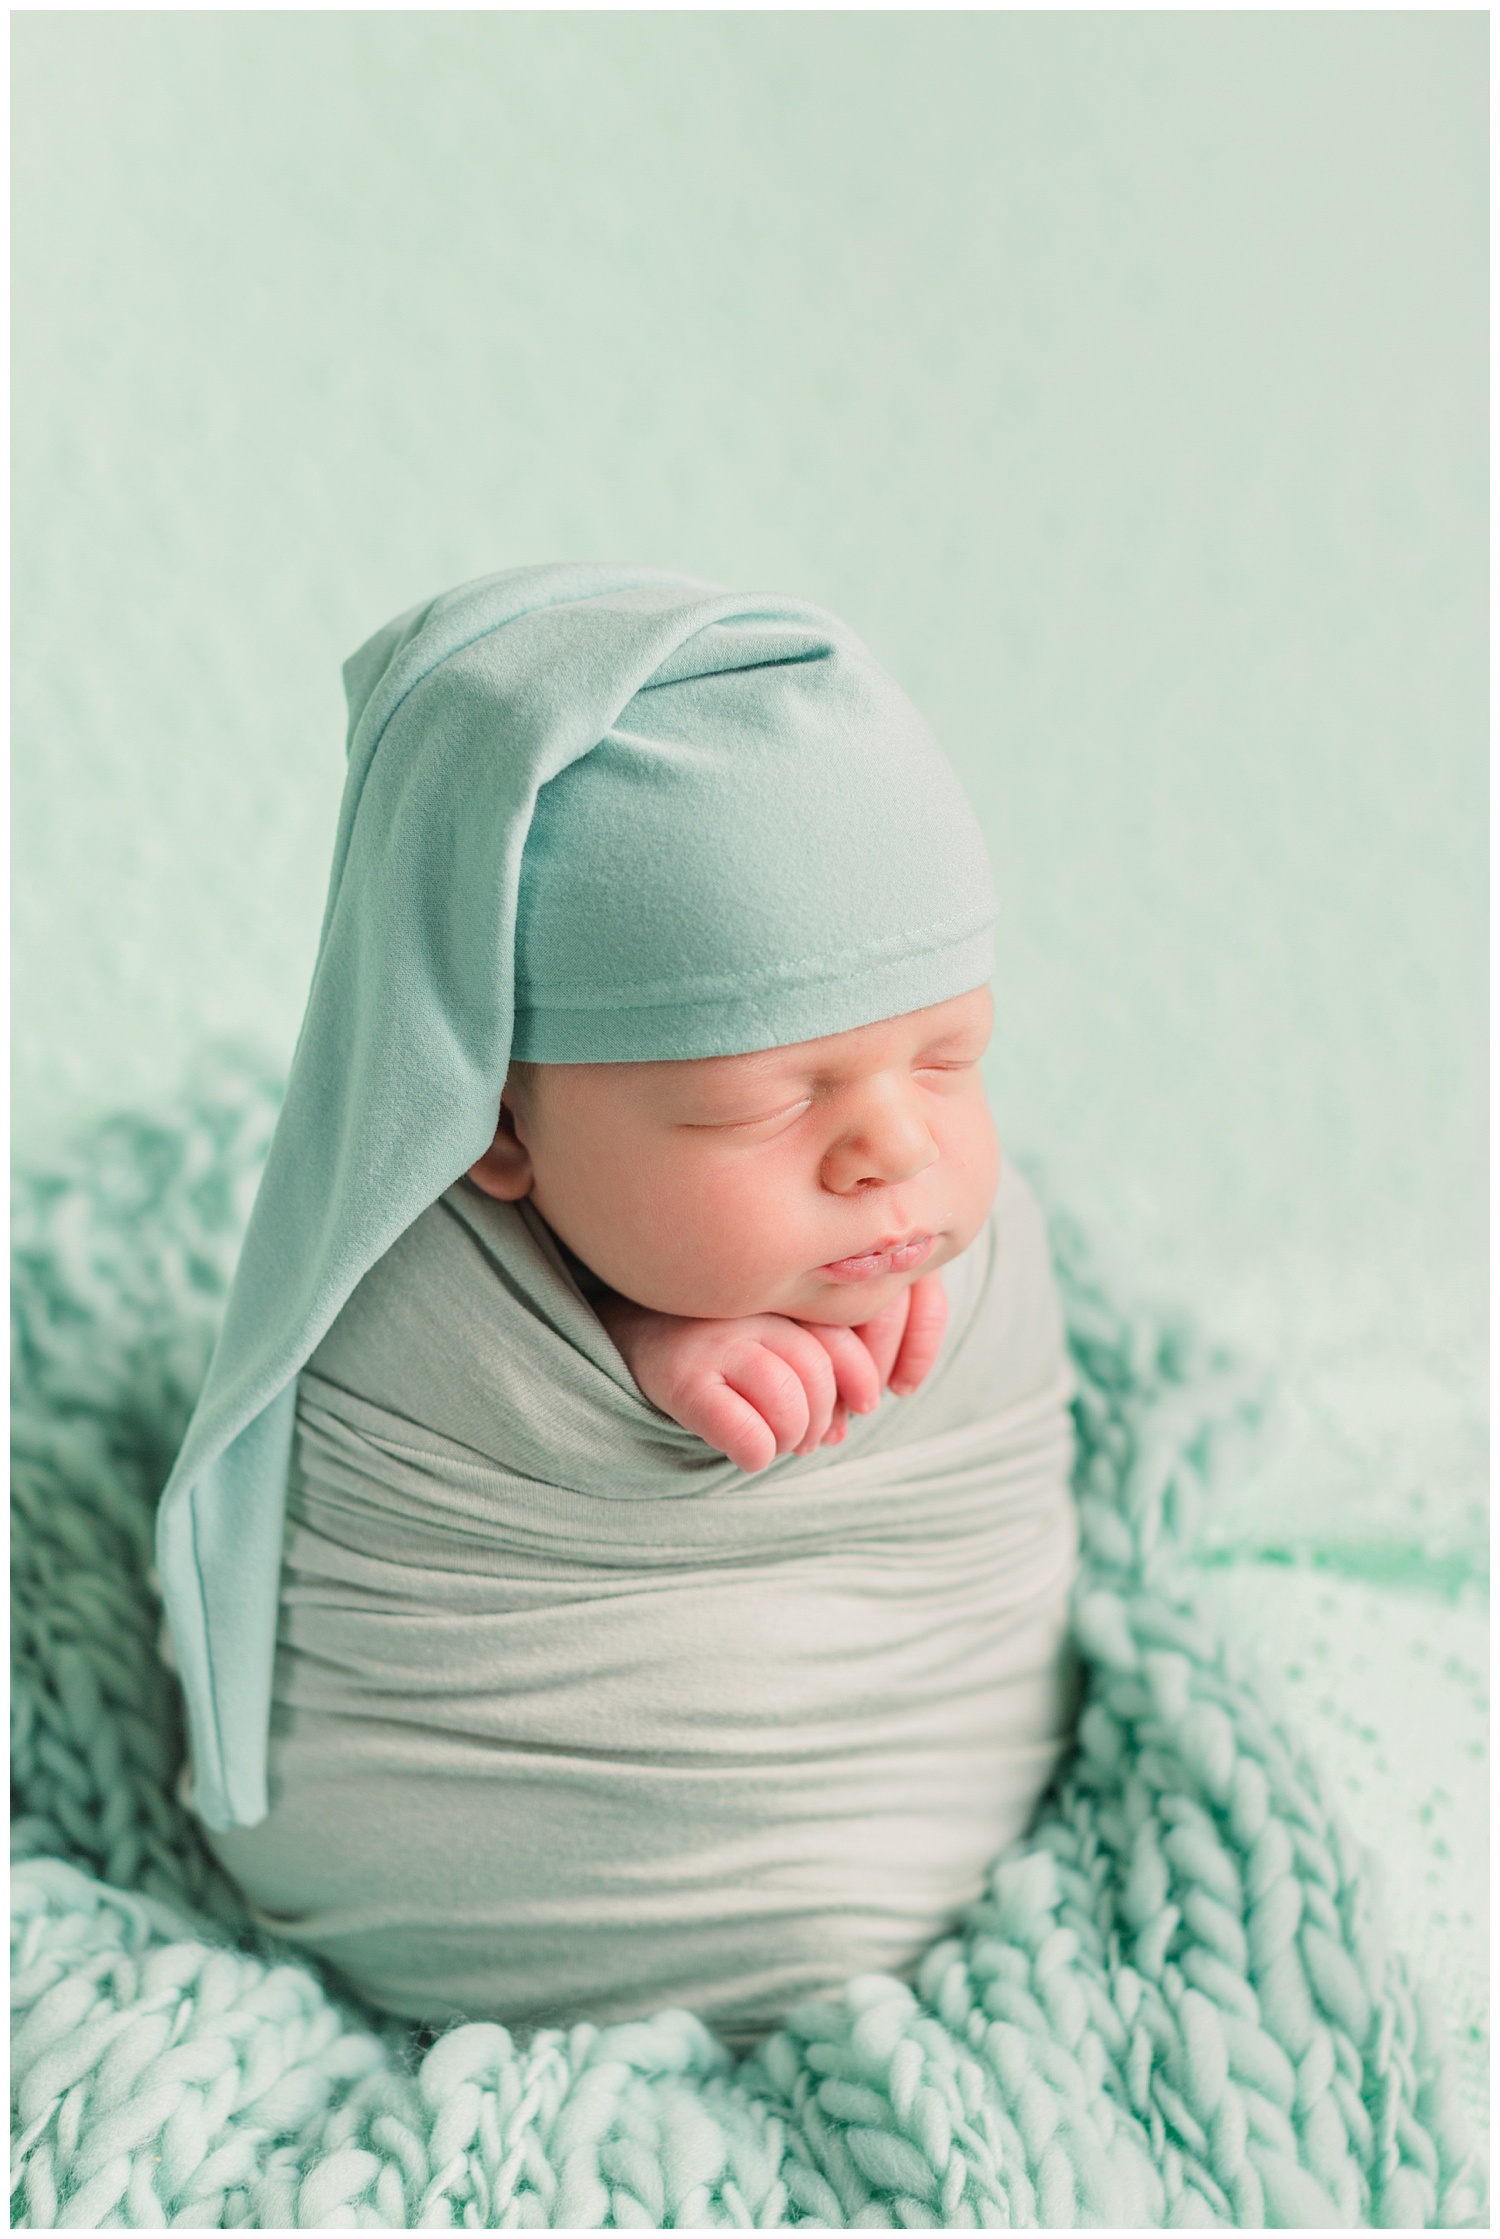 Baby boy Theo wrapped in mint green wearing a mint green night cap nestled in a potato sack pose on a mint green background fabric | CB Studio